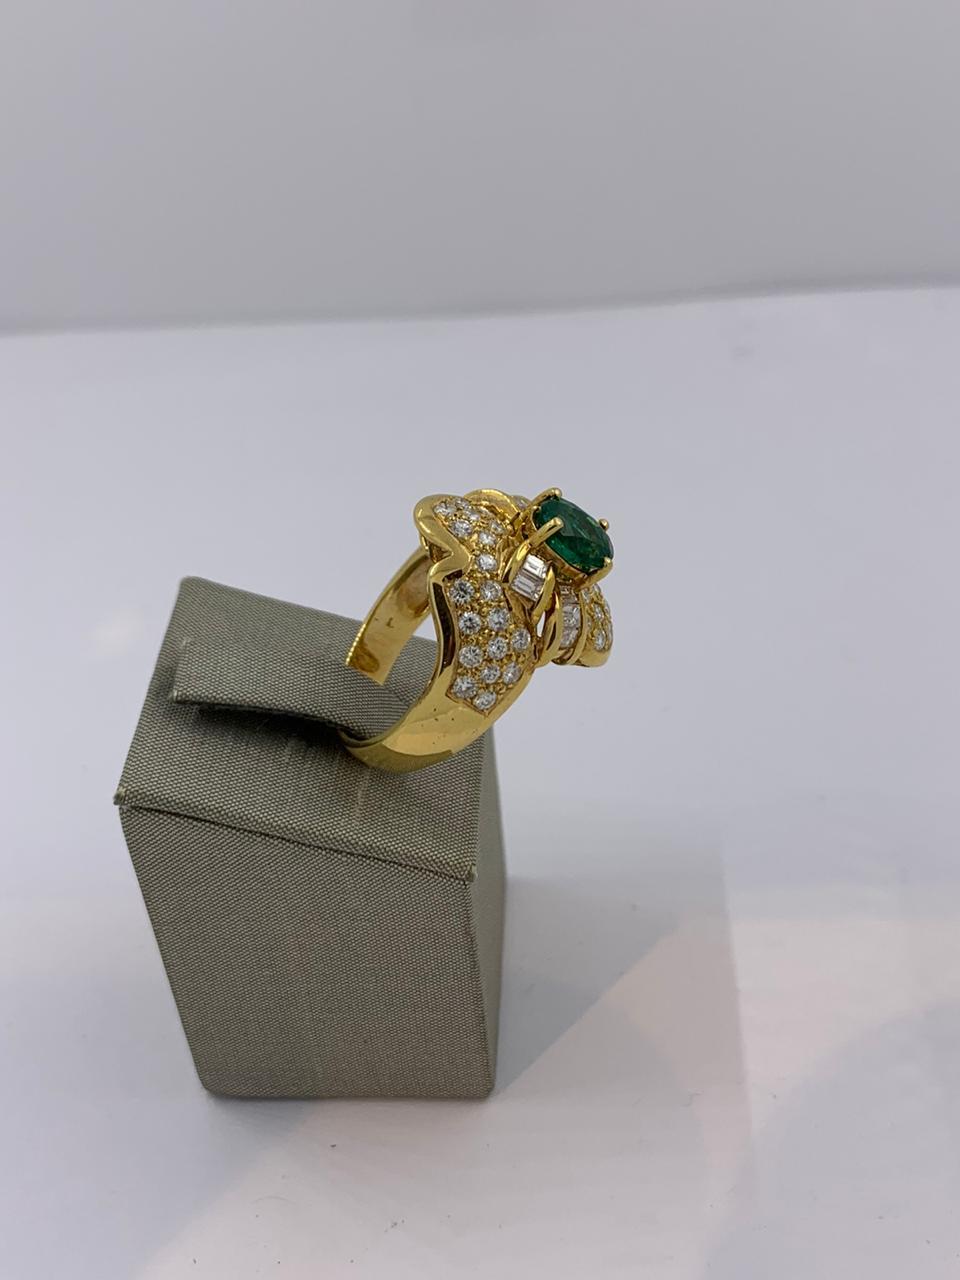 Emerald and Diamond Ring 
set in 18kt Yellow Gold
Emerald 0/86 ct
Diamond 0.42 ct
R Diamonds 0.78ct
21-10257